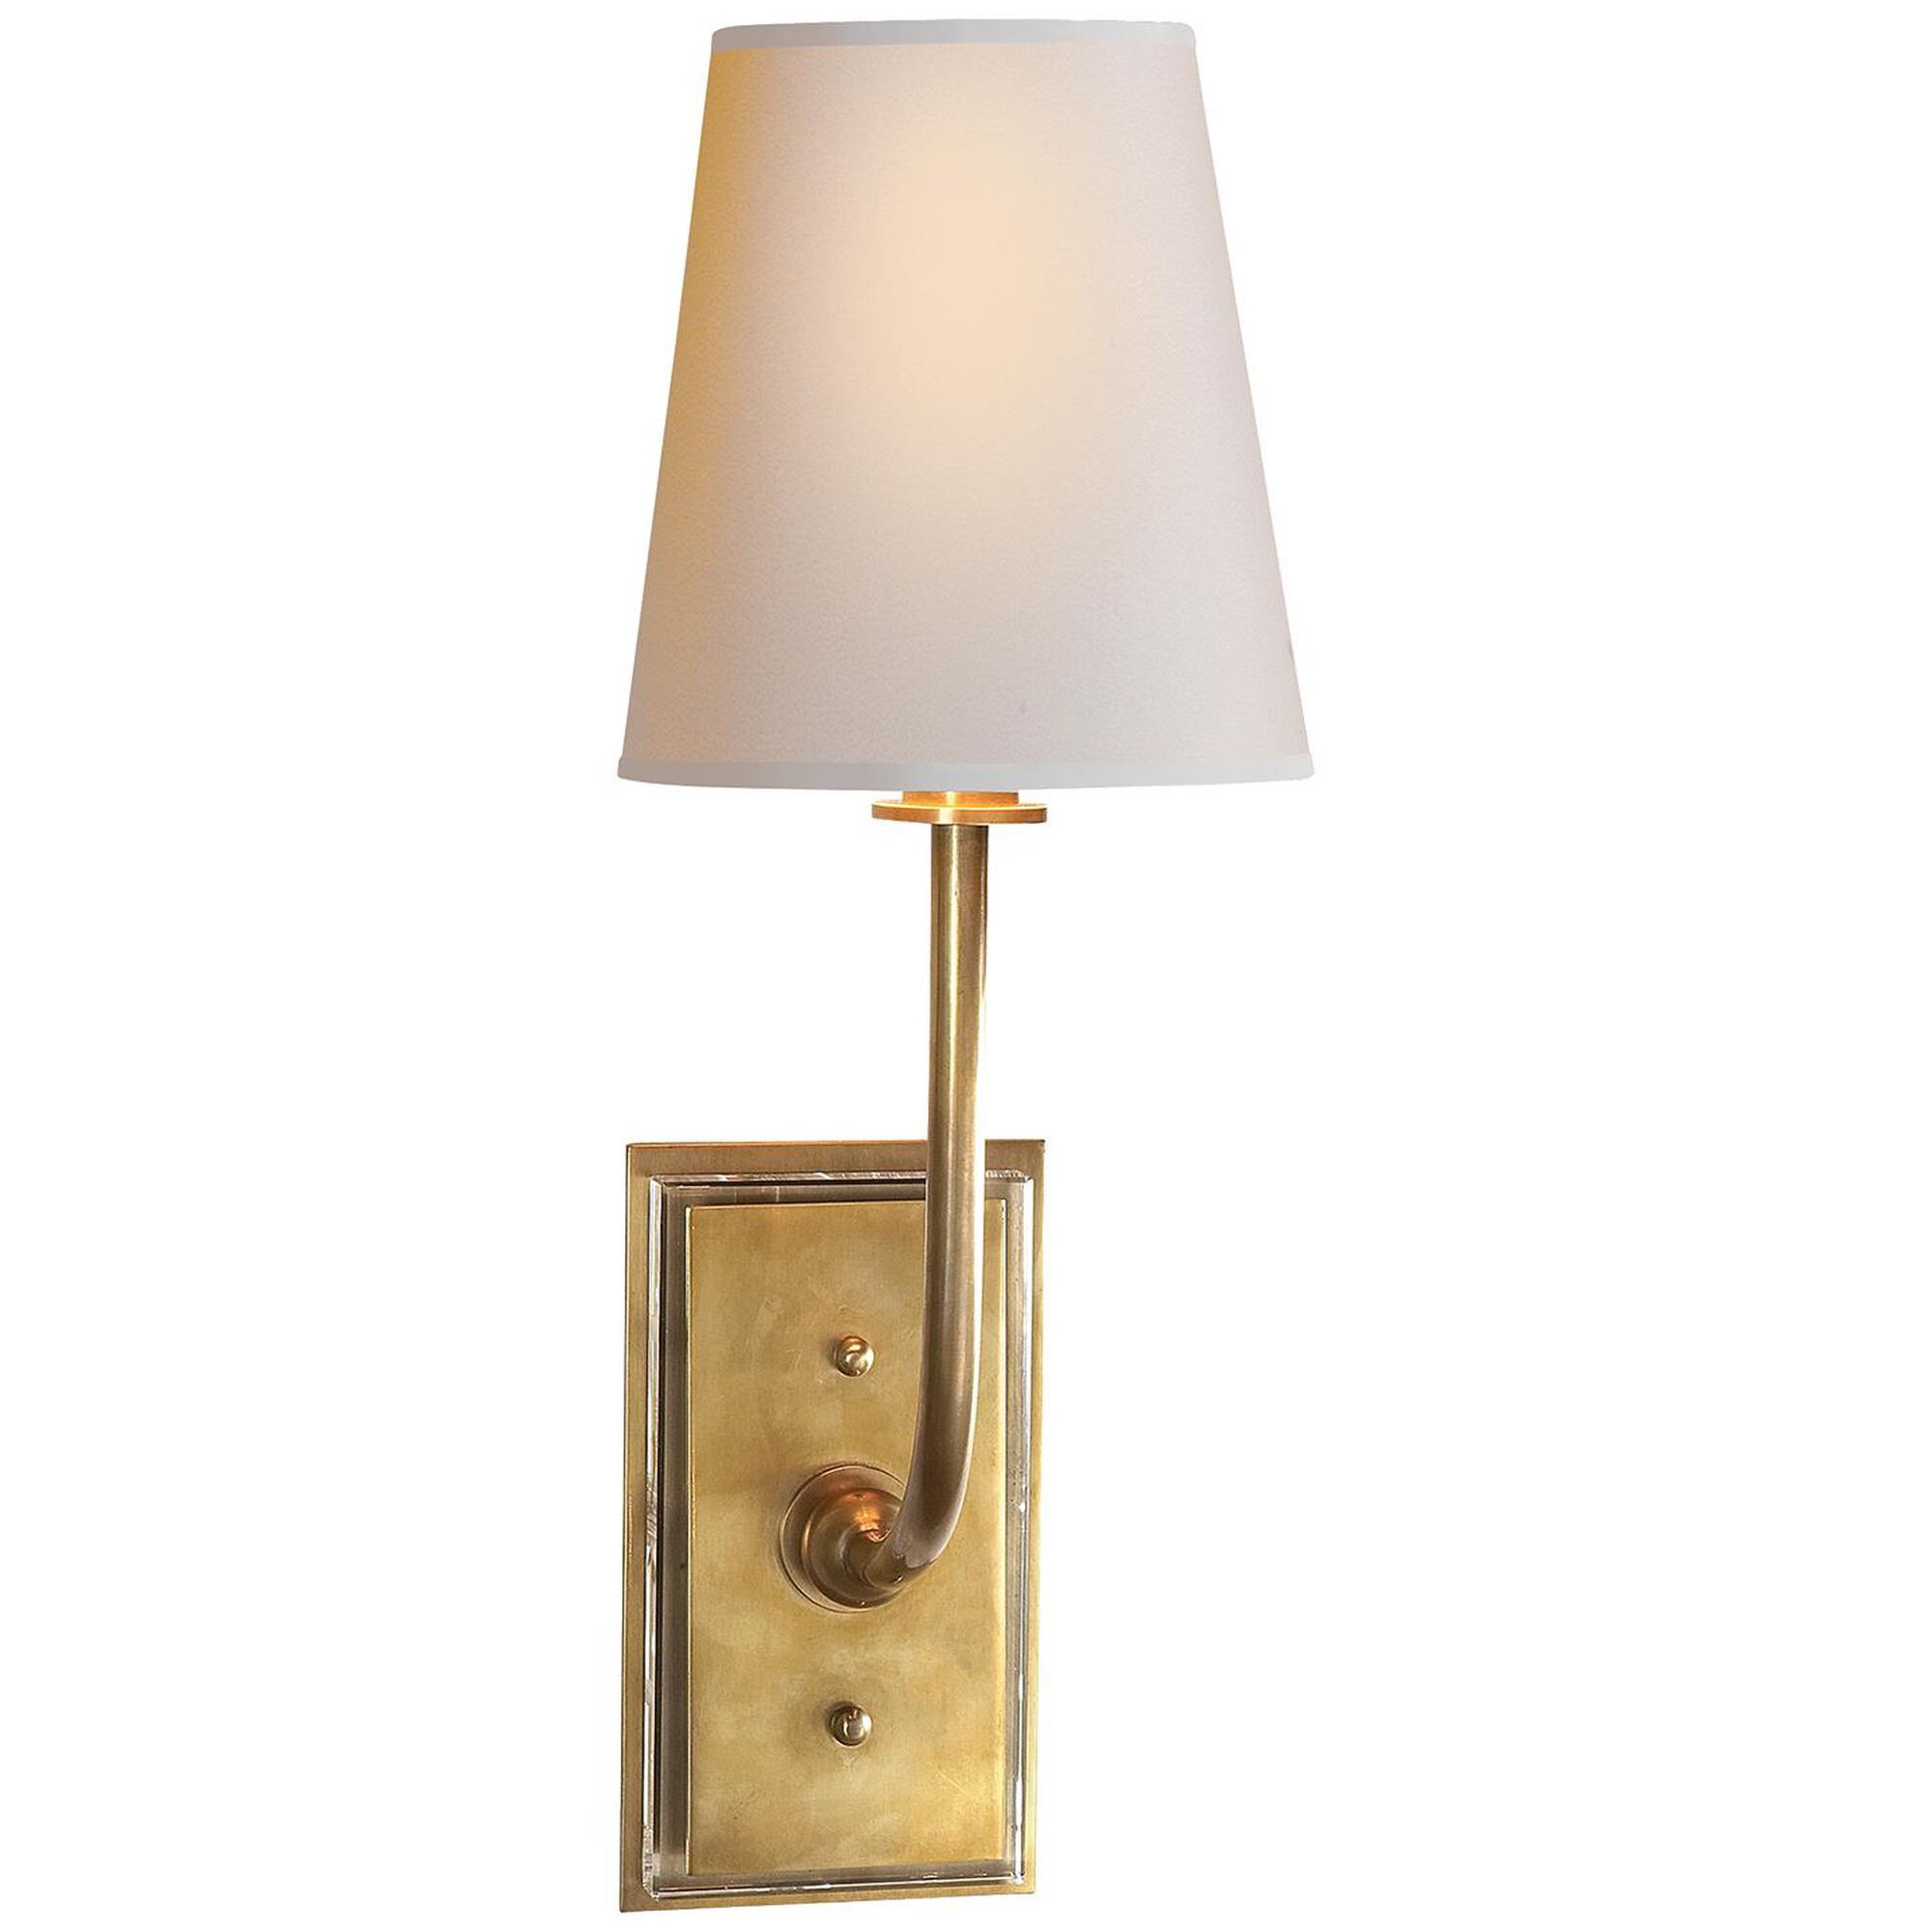 Thomas O'Brien Hulton 16 Inch Wall Sconce by Visual Comfort and Co. | Capitol Lighting 1800lighting.com